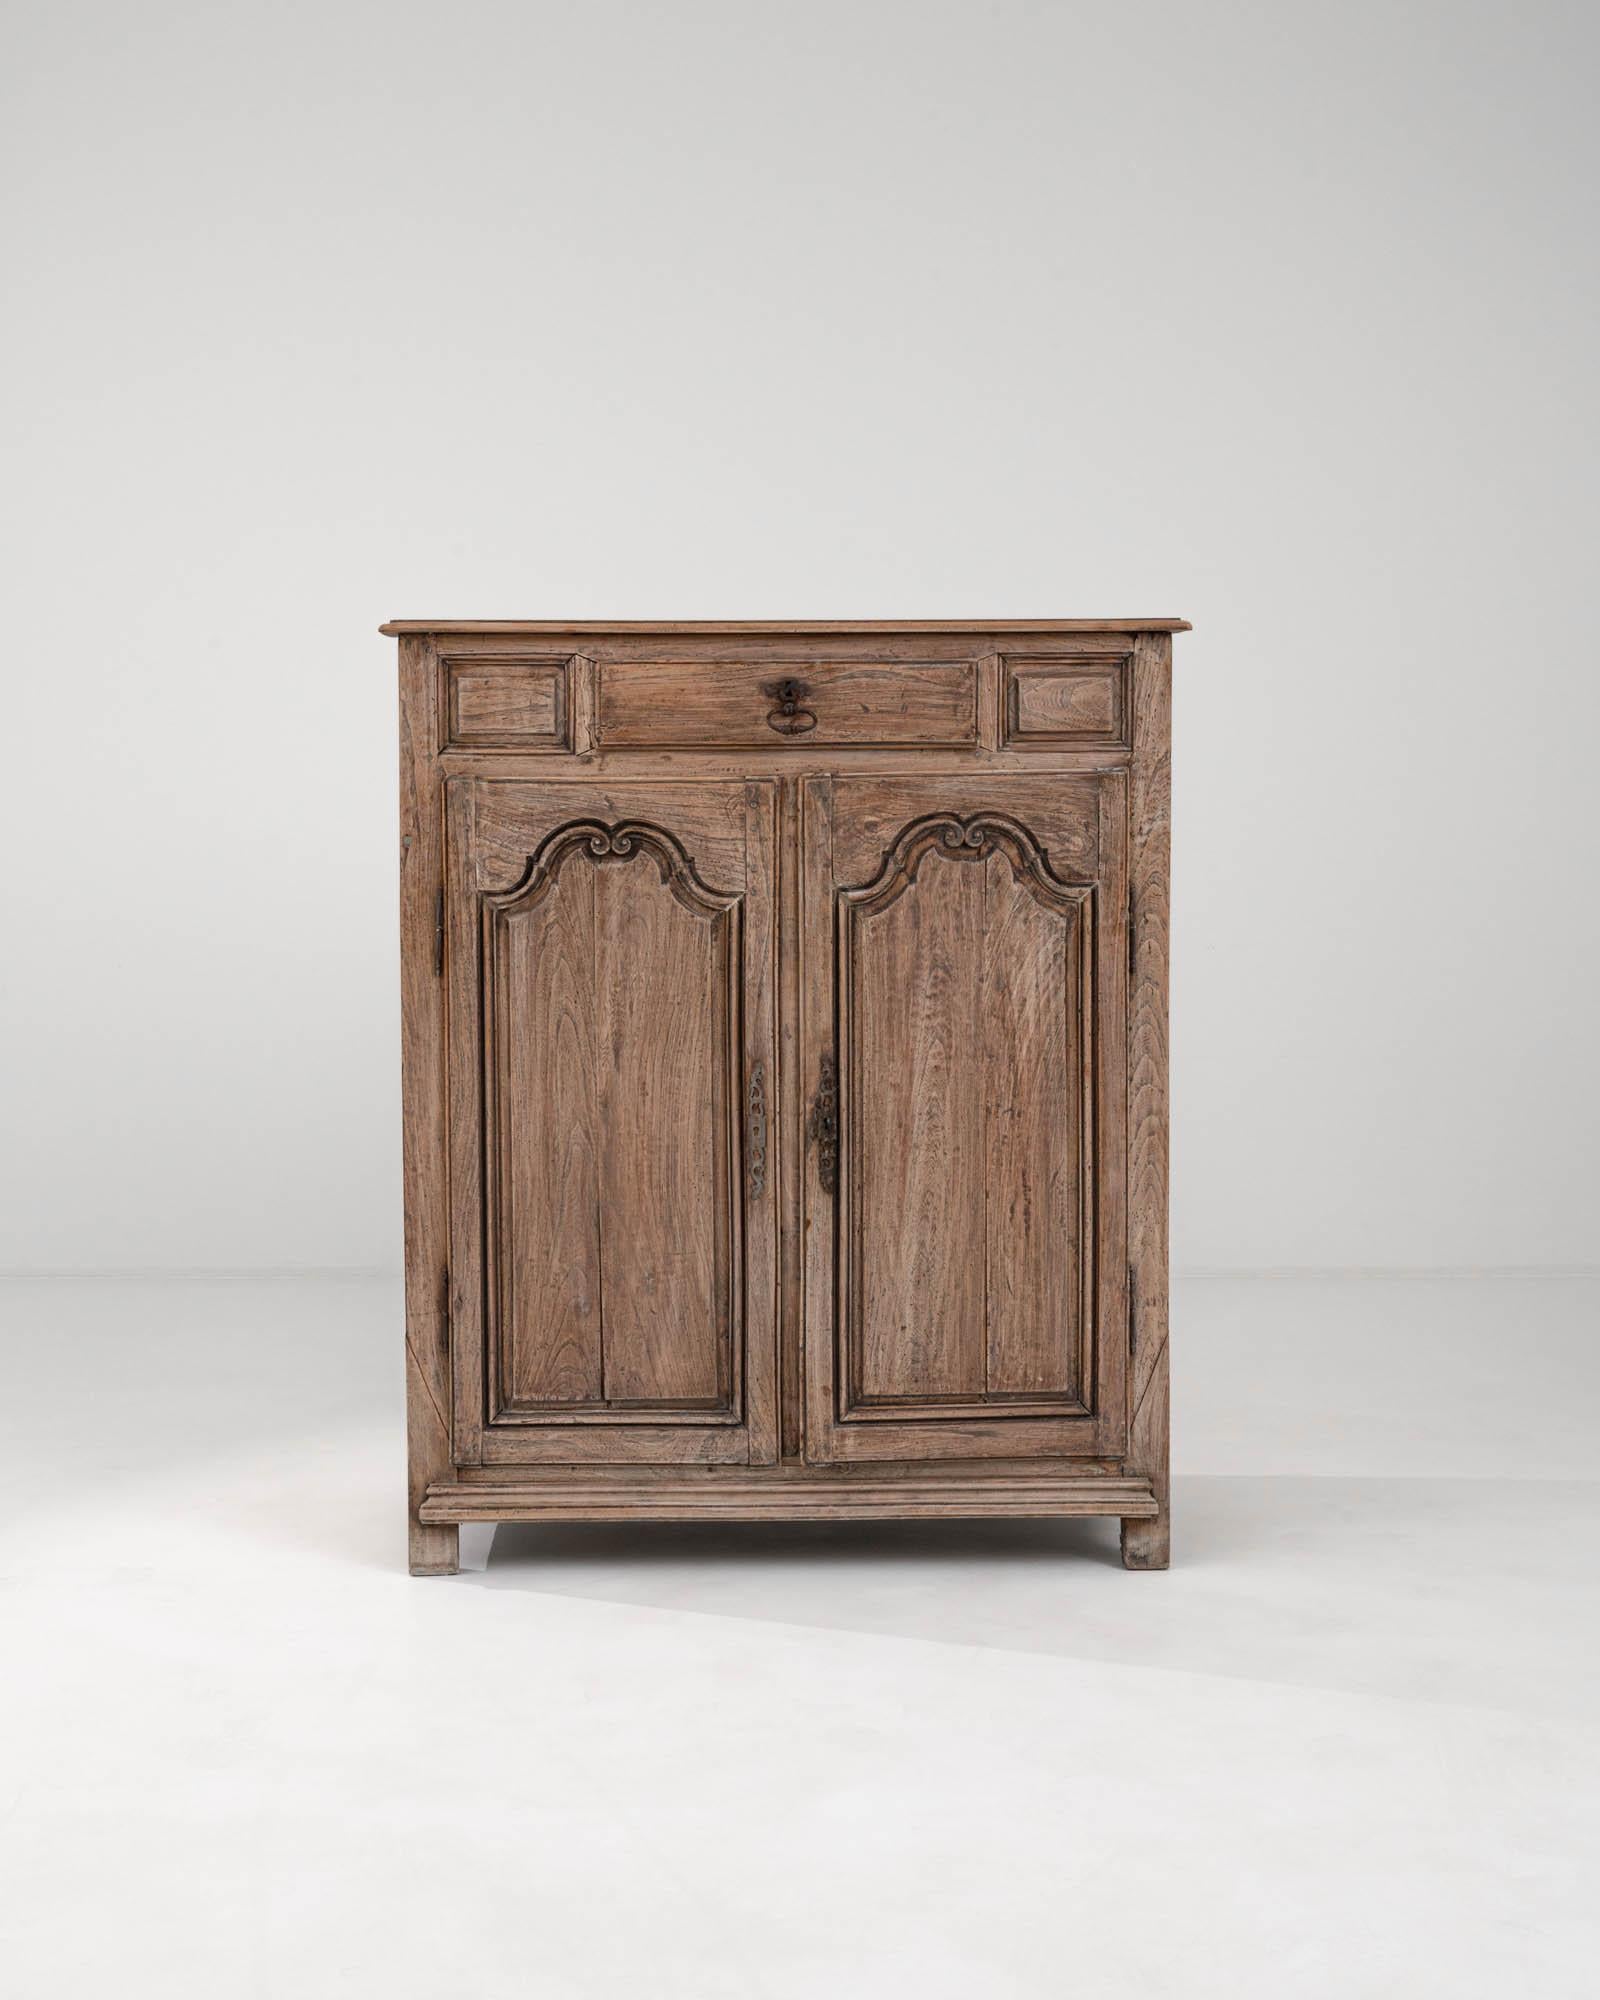 This 1820s French Wooden Buffet is a testament to timeless craftsmanship and provincial charm. Constructed from solid wood, this piece showcases the natural beauty and grain of the material, enhanced by a warm patina that tells the story of its age.